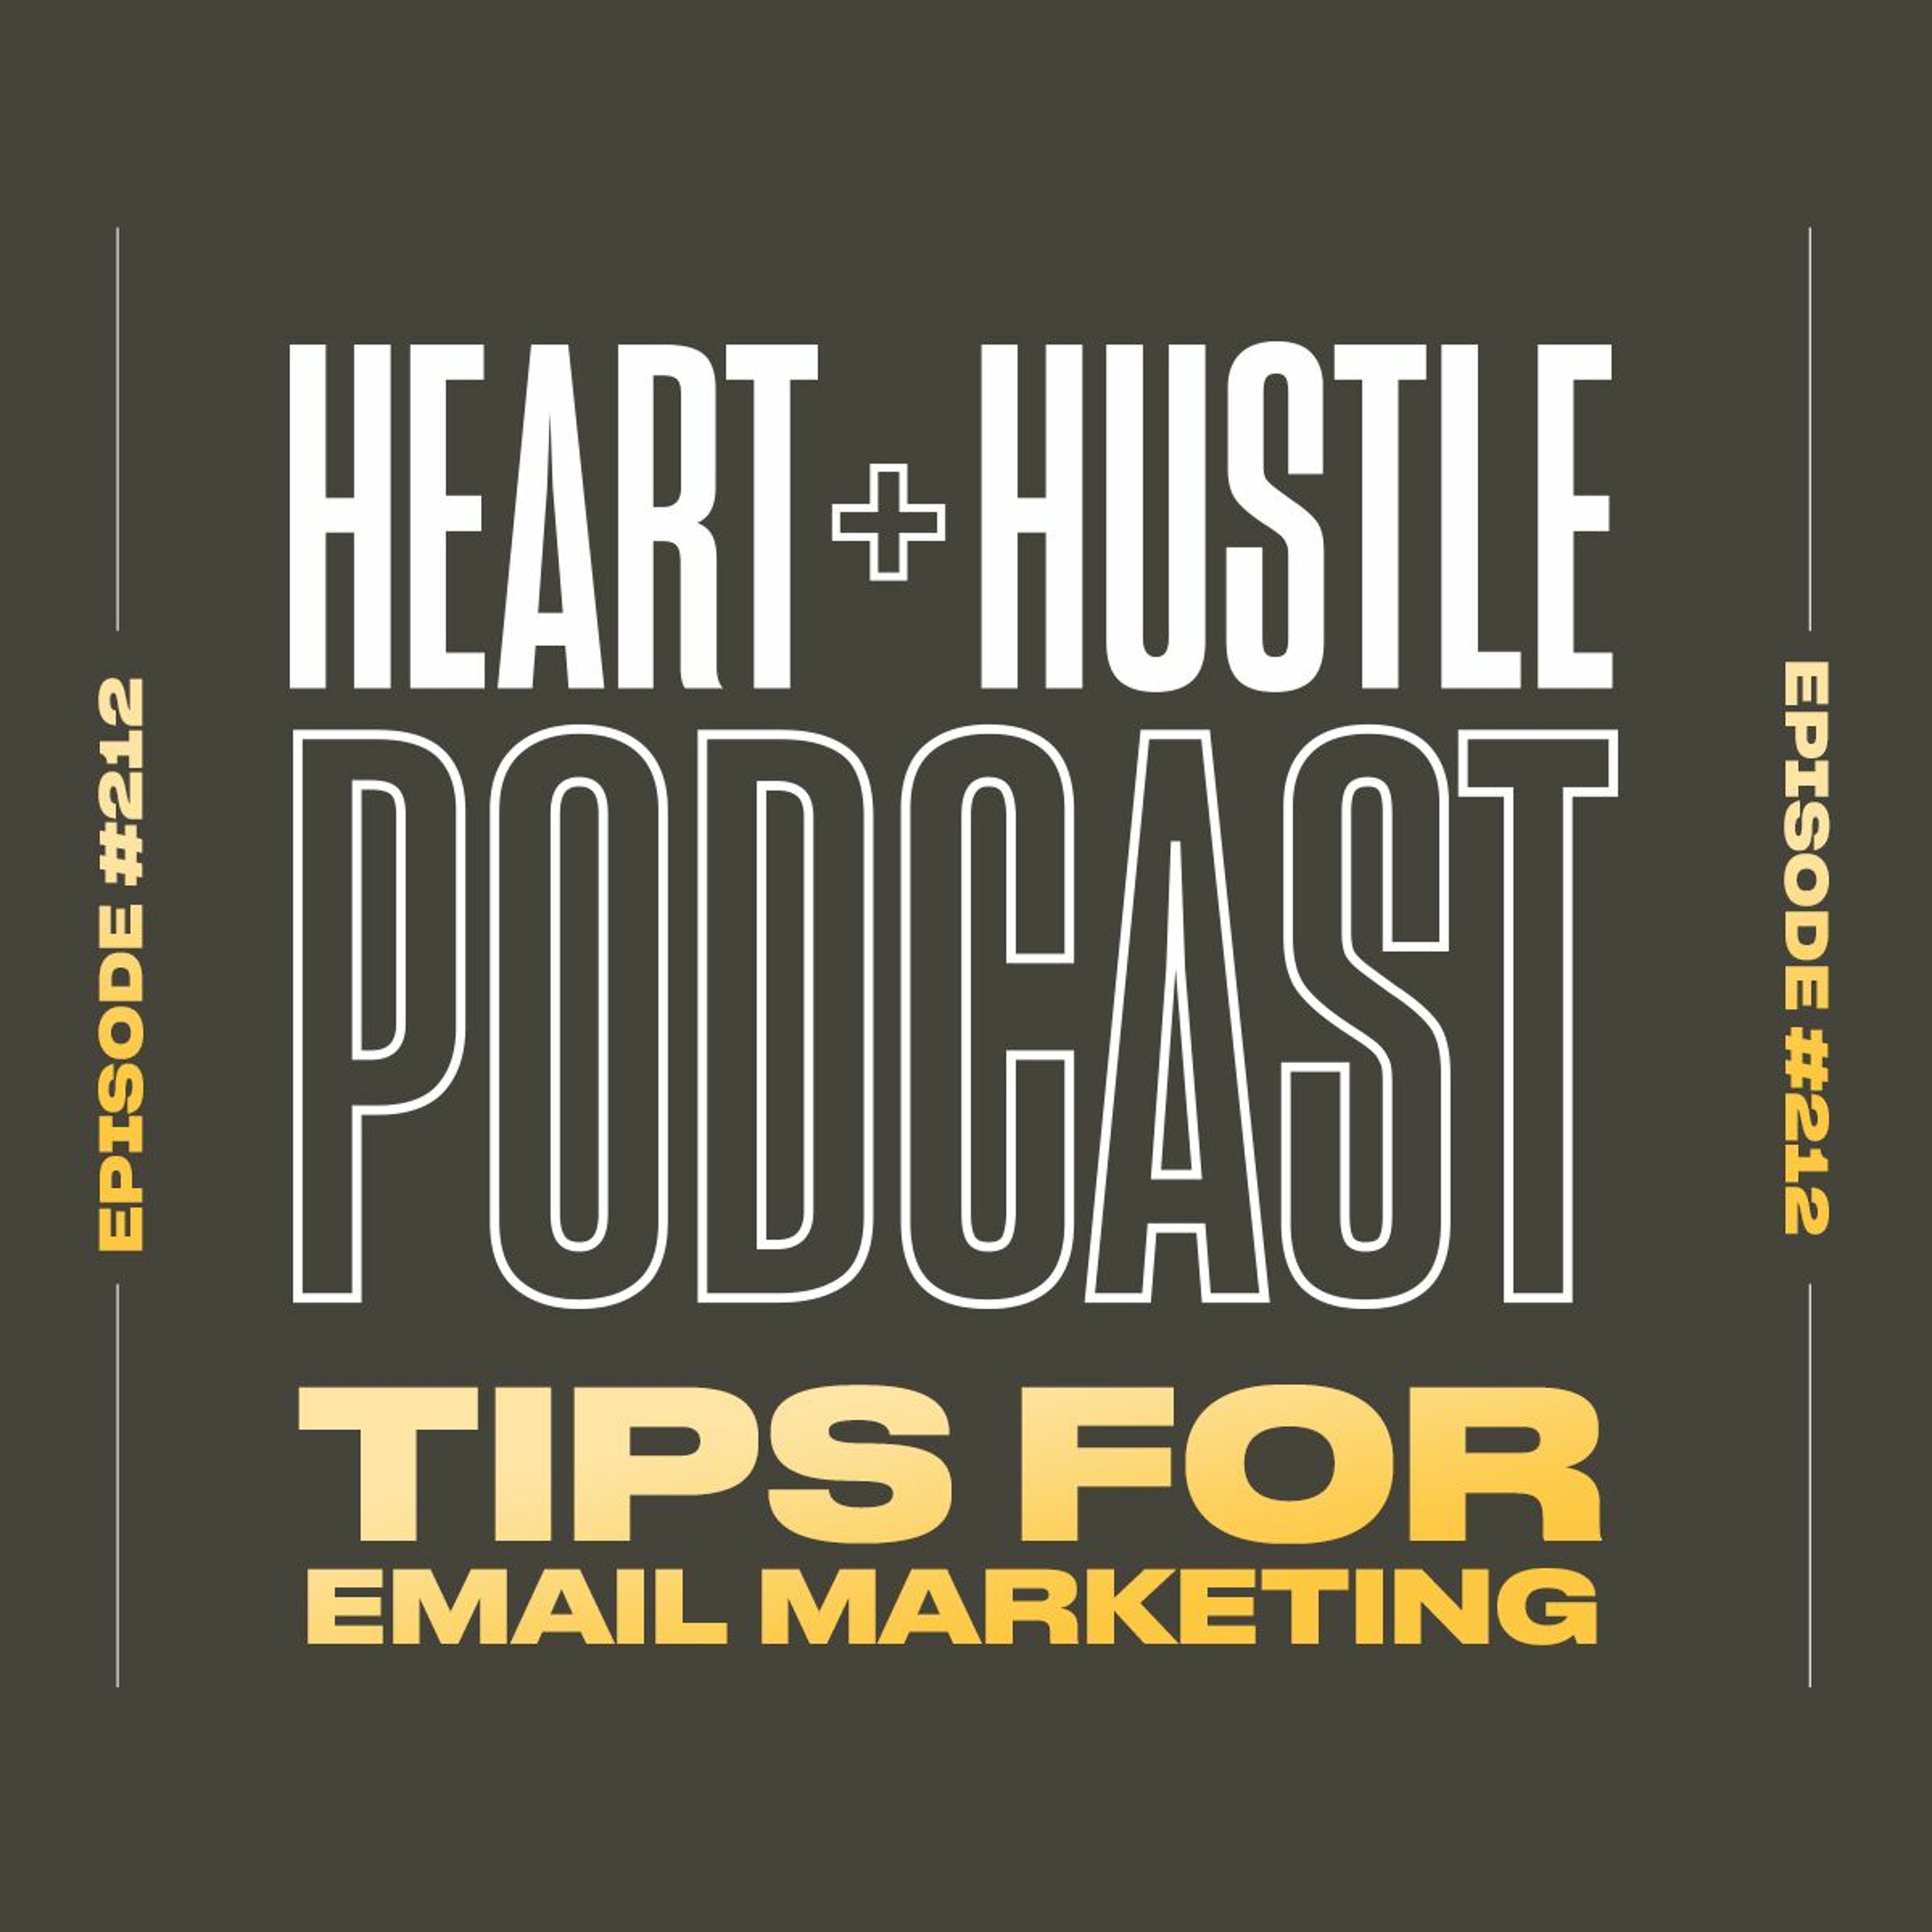 #212 - Tips for Email Marketing